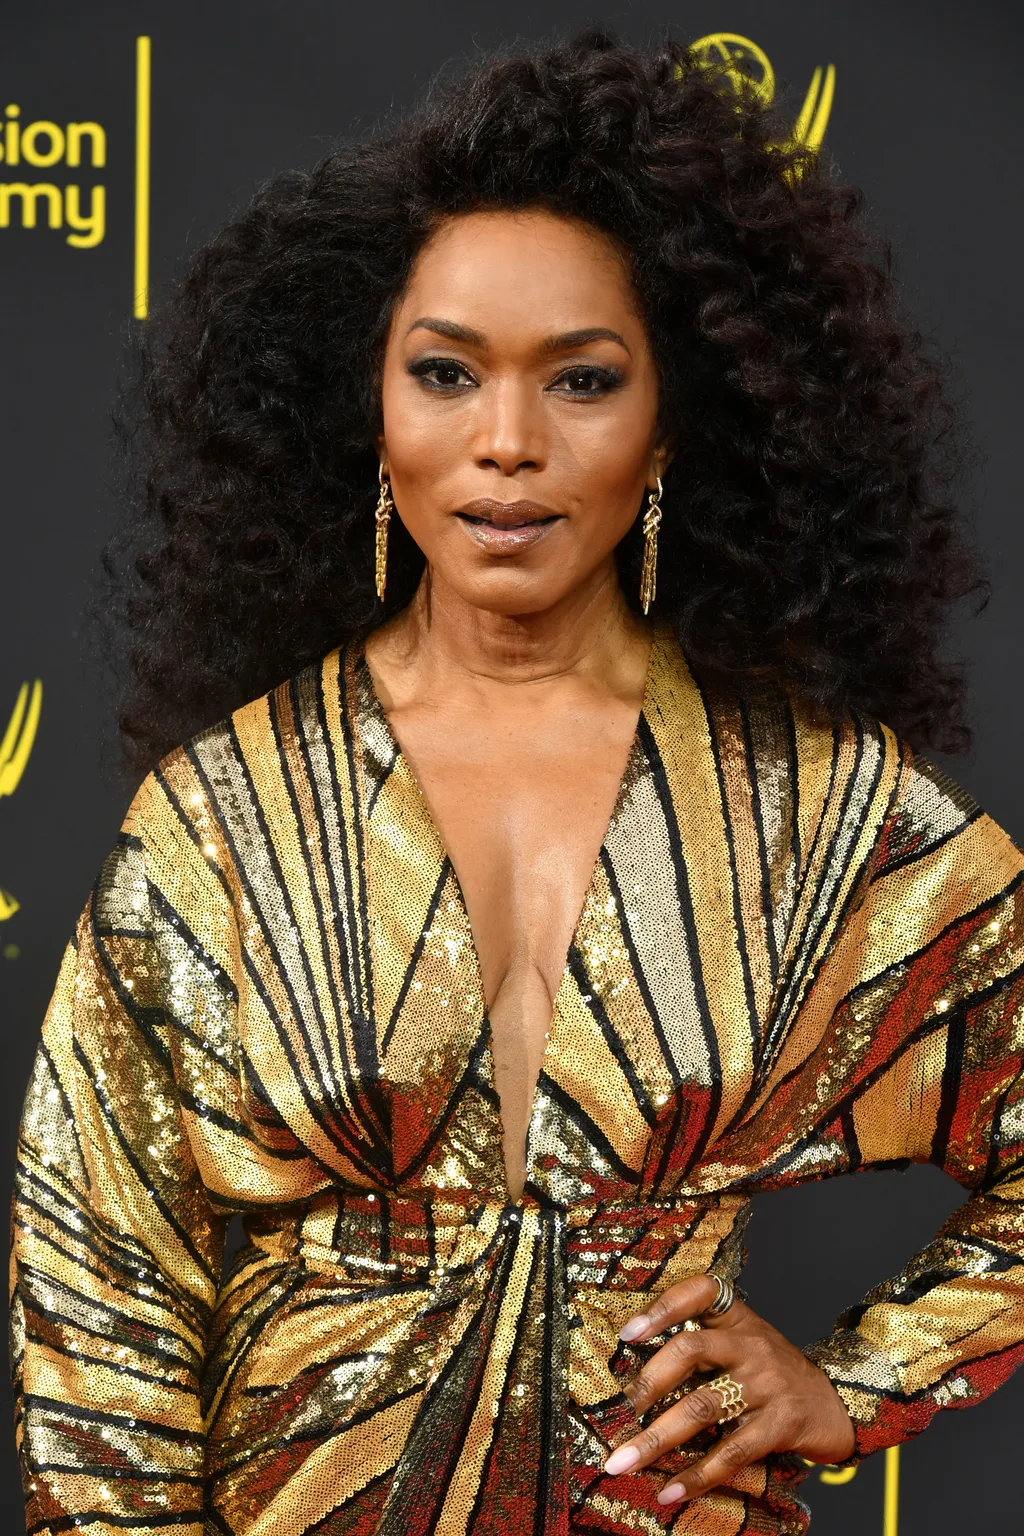 2019 Creative Arts Emmy Awards - Arrivals GettyImageRank2 arts culture and entertainment 